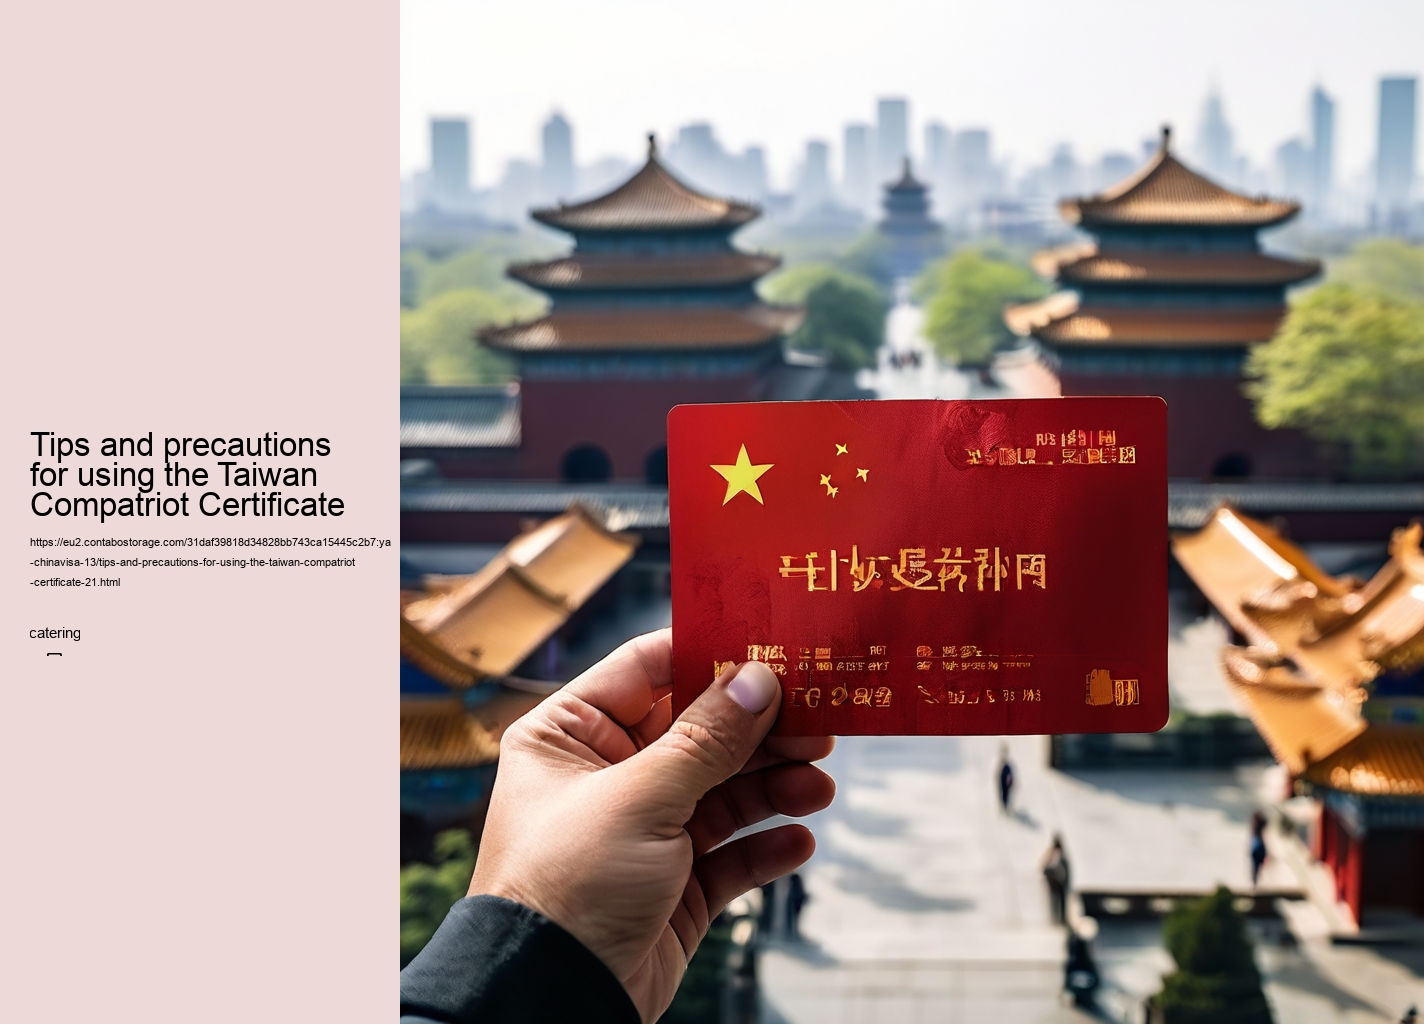 Tips and precautions for using the Taiwan Compatriot Certificate